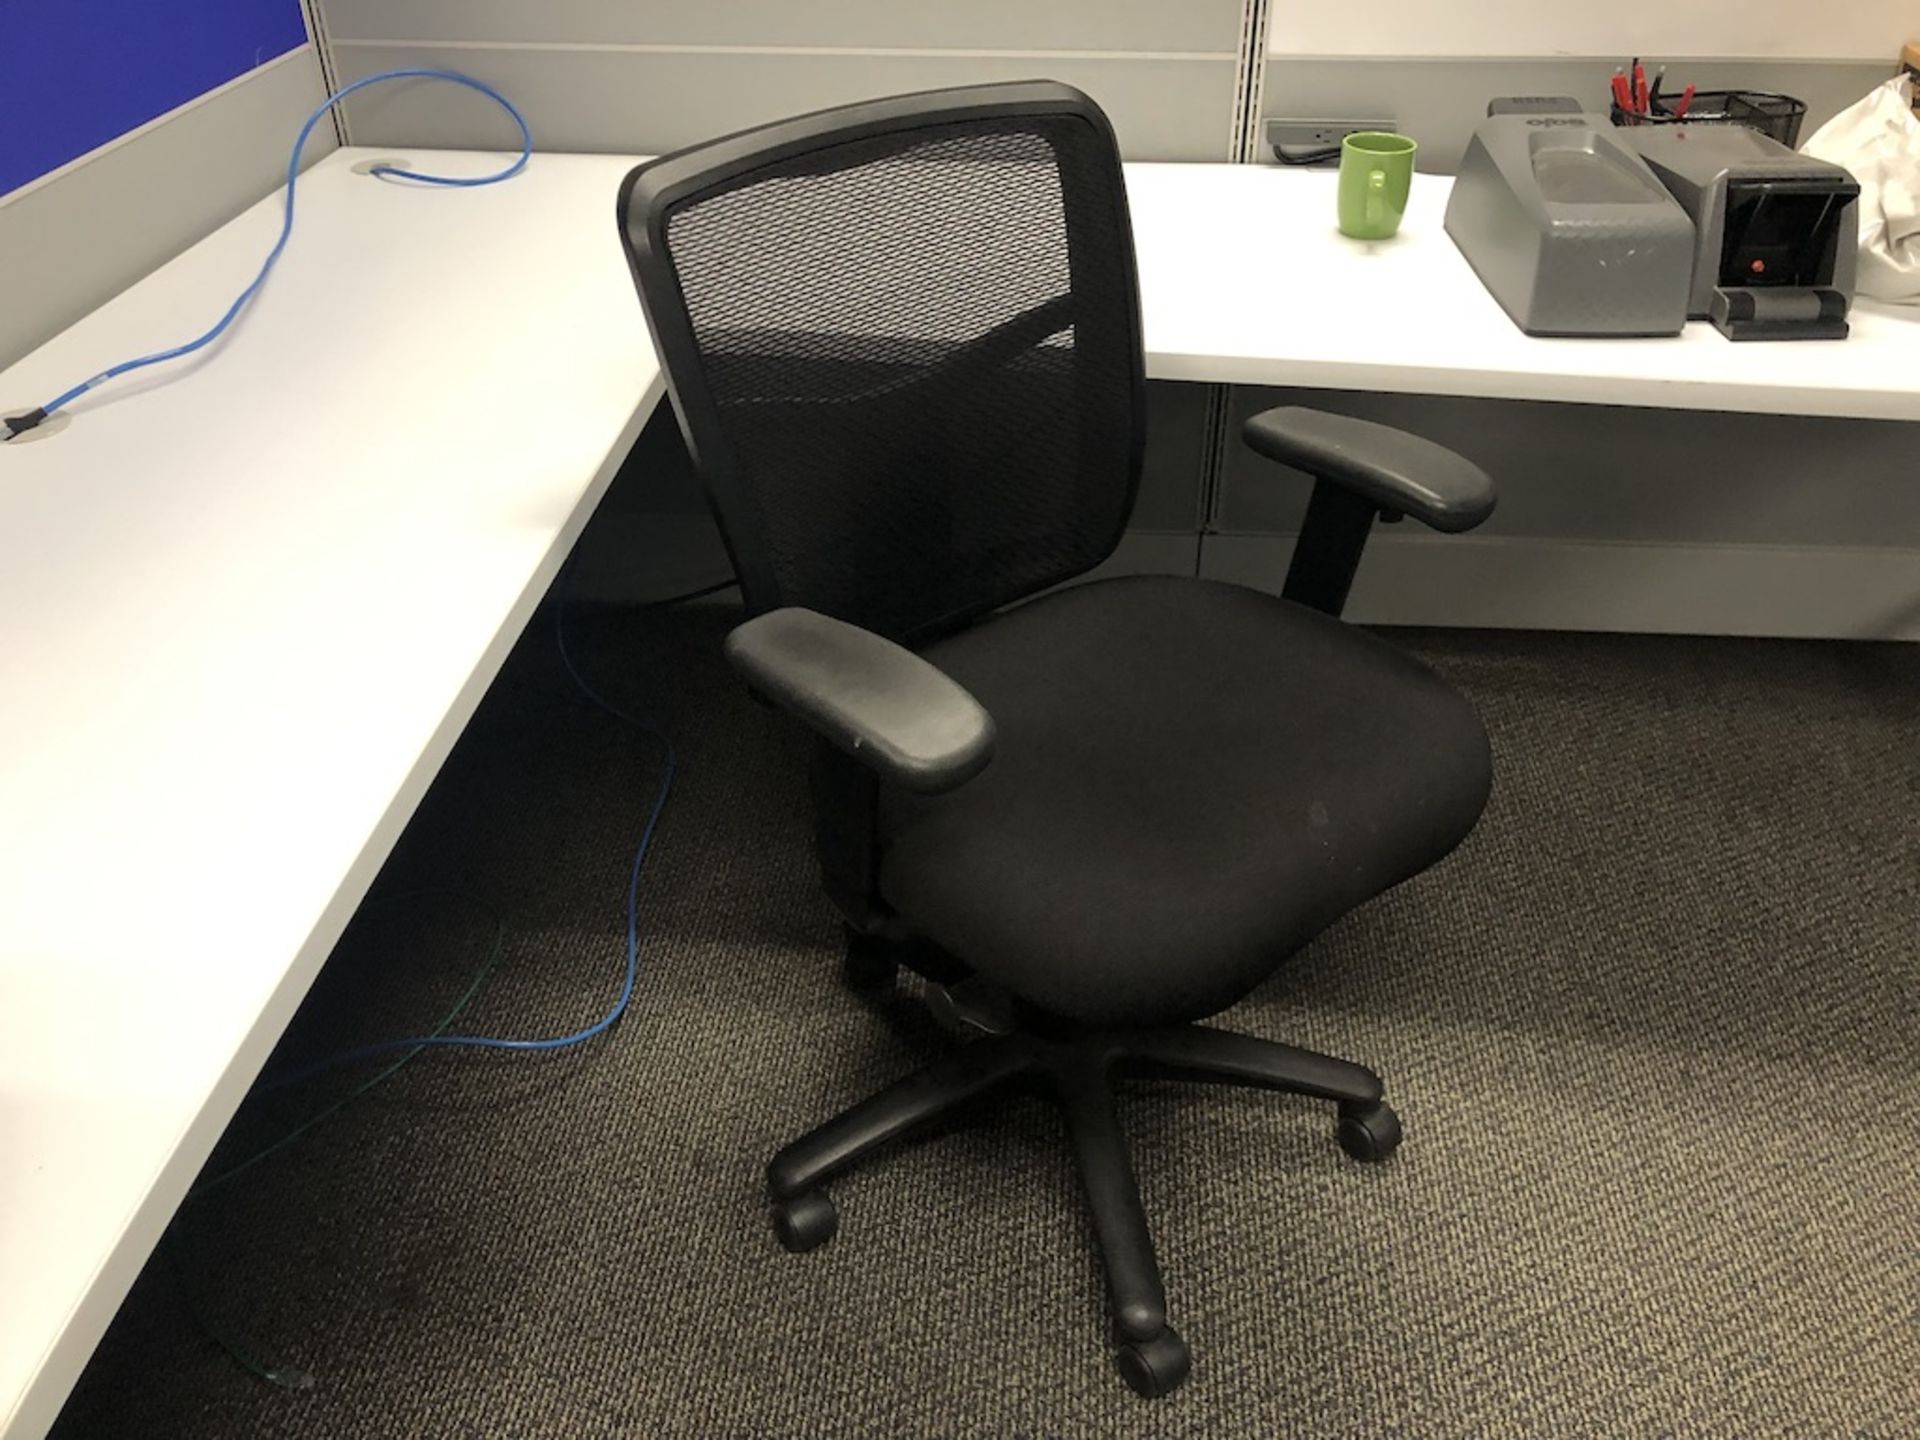 5 CASTER OFFICE CHAIR PADDED ARM REST, BLACK SEATED CUSHION, MESH BACK SUPPORT   SCHNEIDER ELECTRIC- - Image 2 of 3